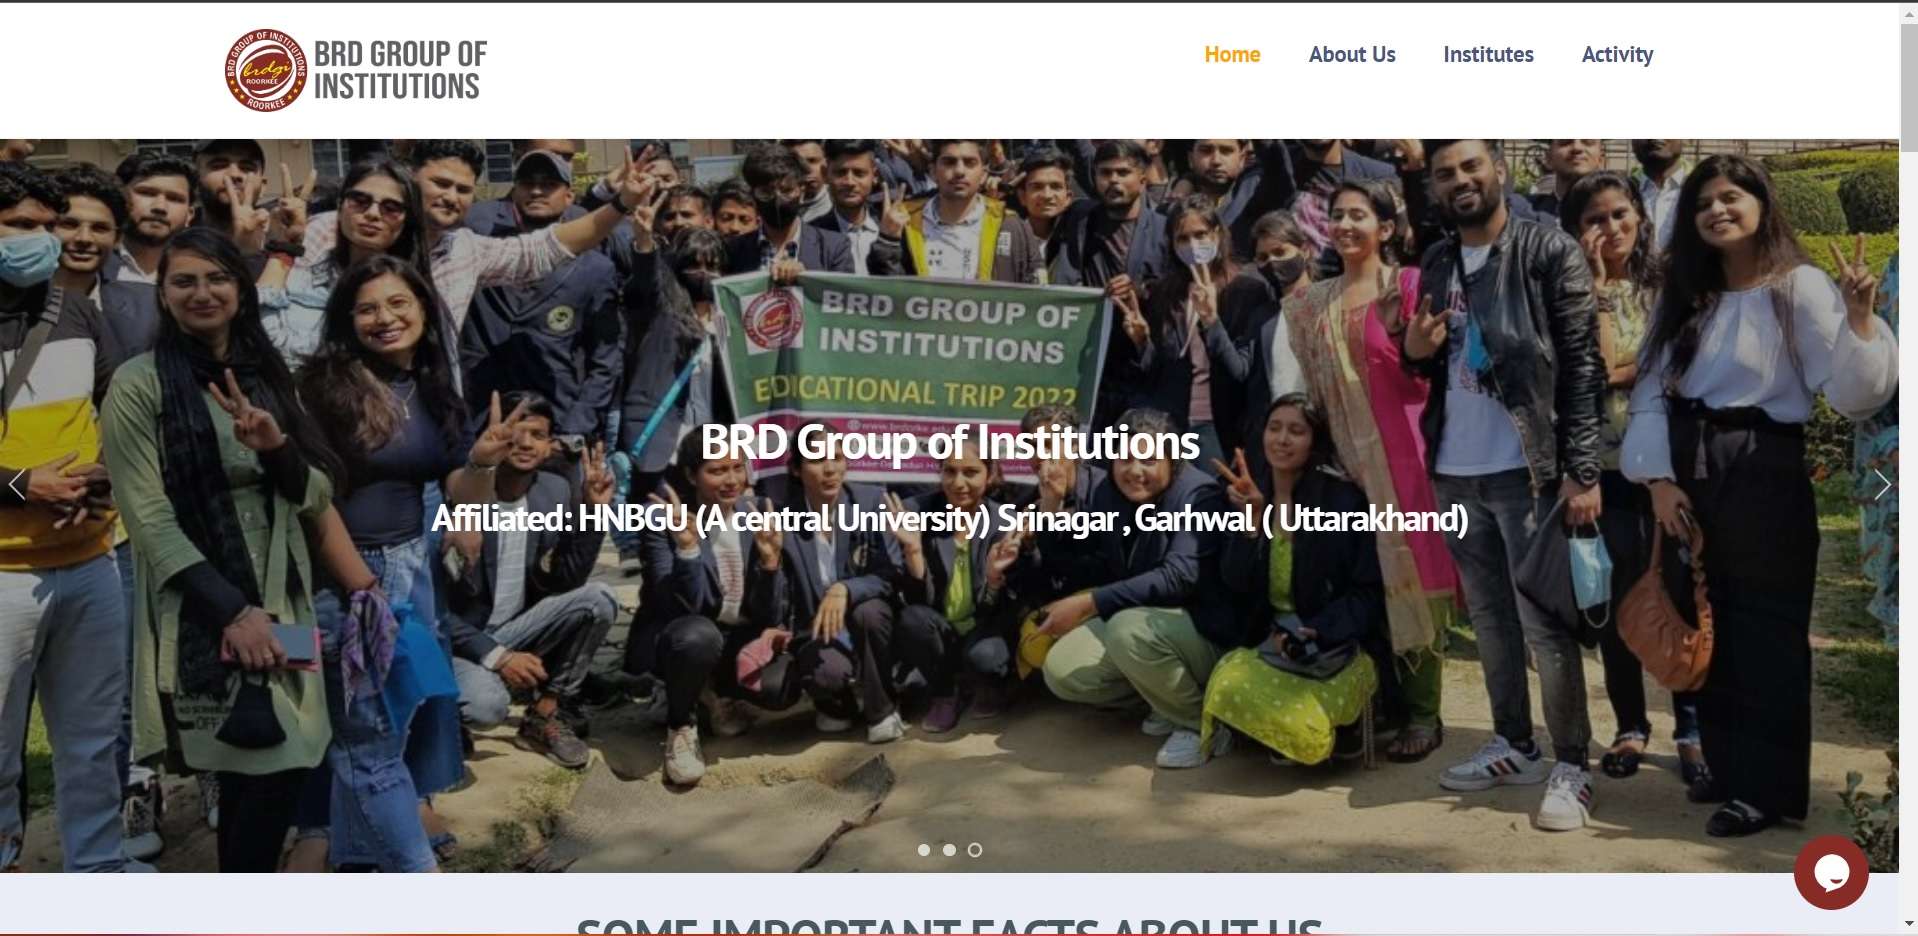 BRD Group of Institutions